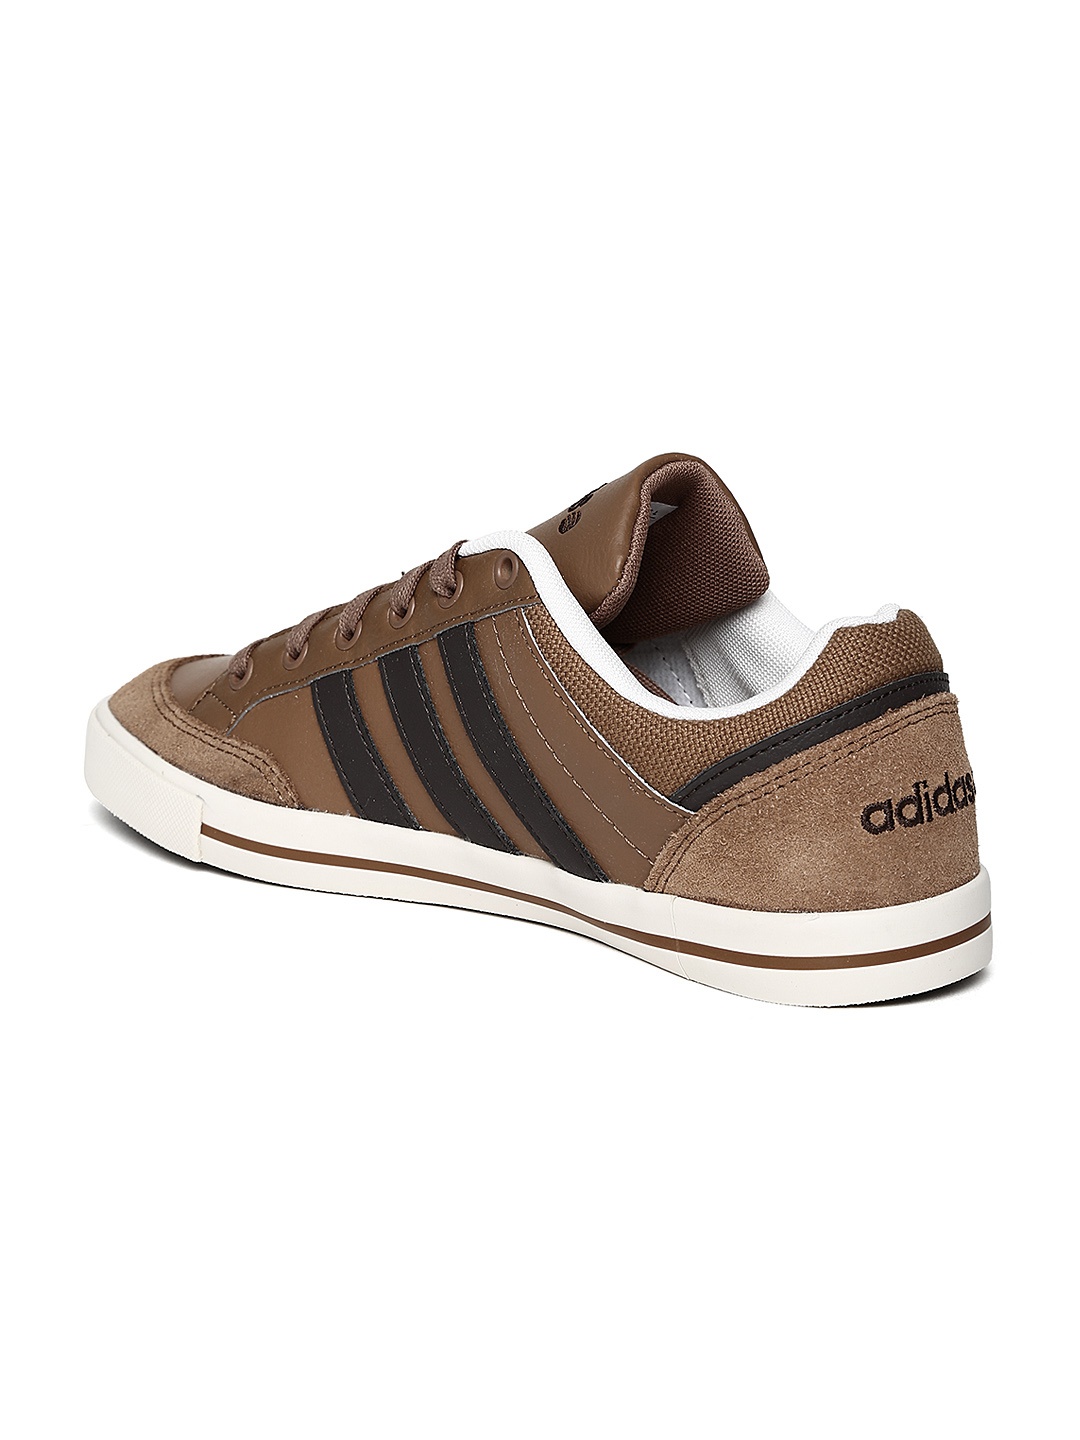 Adidas Neo Shoes Men Brown | vlr.eng.br